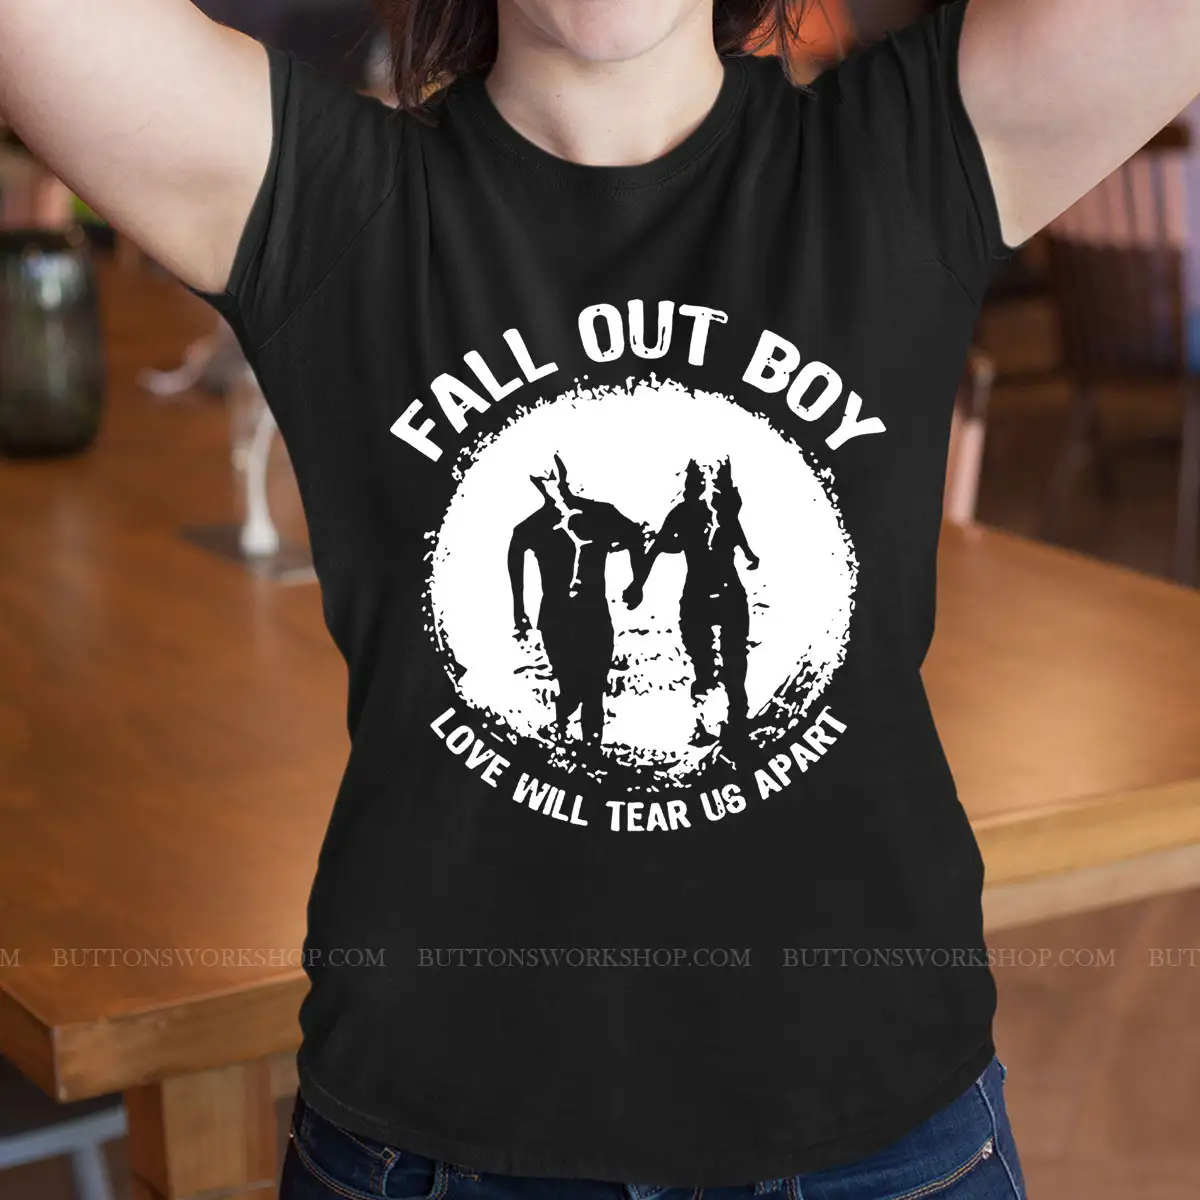 Fall Out Boy Is For Lovers Shirt Unisex Tshirt